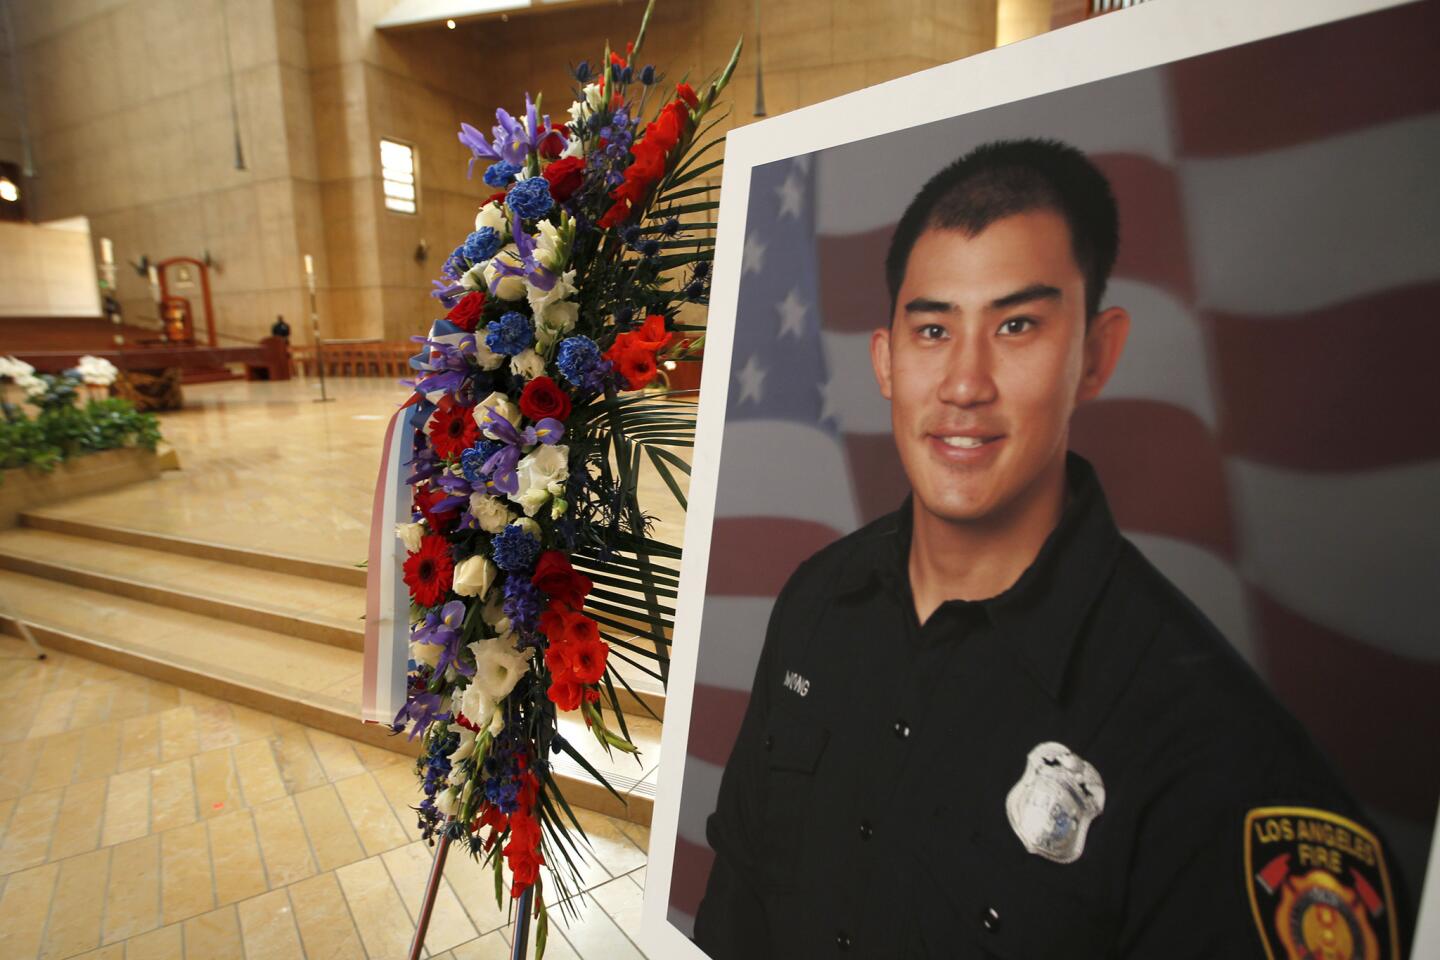 Funeral services for LAFD firefighter Kelly Wong